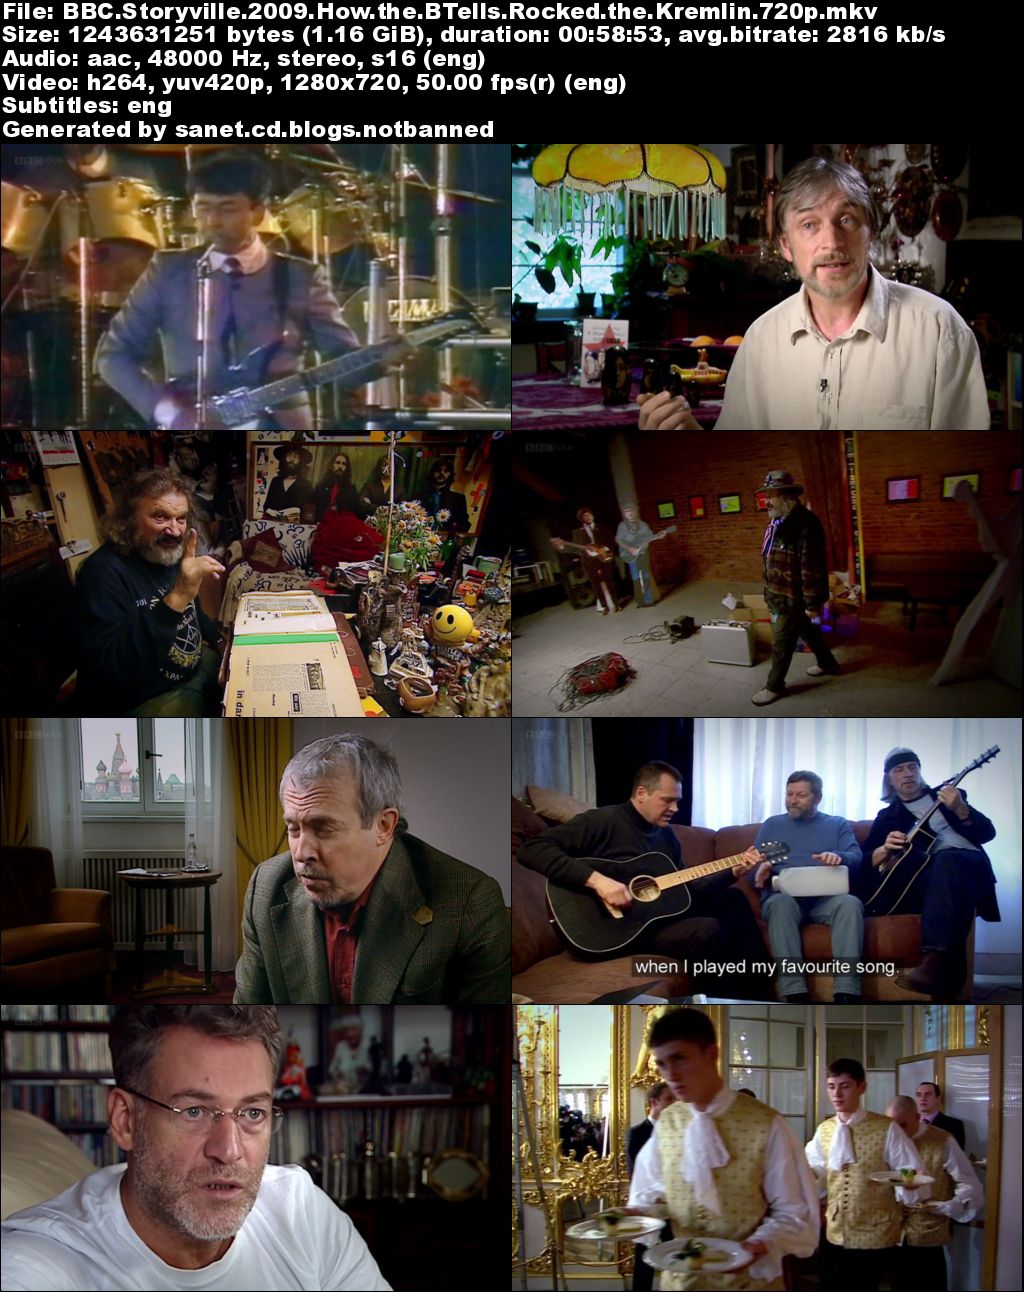 Download BBC Storyville How the Beatles Rocked the Kremlin (2009) 720p HDTV x264 MVGroup